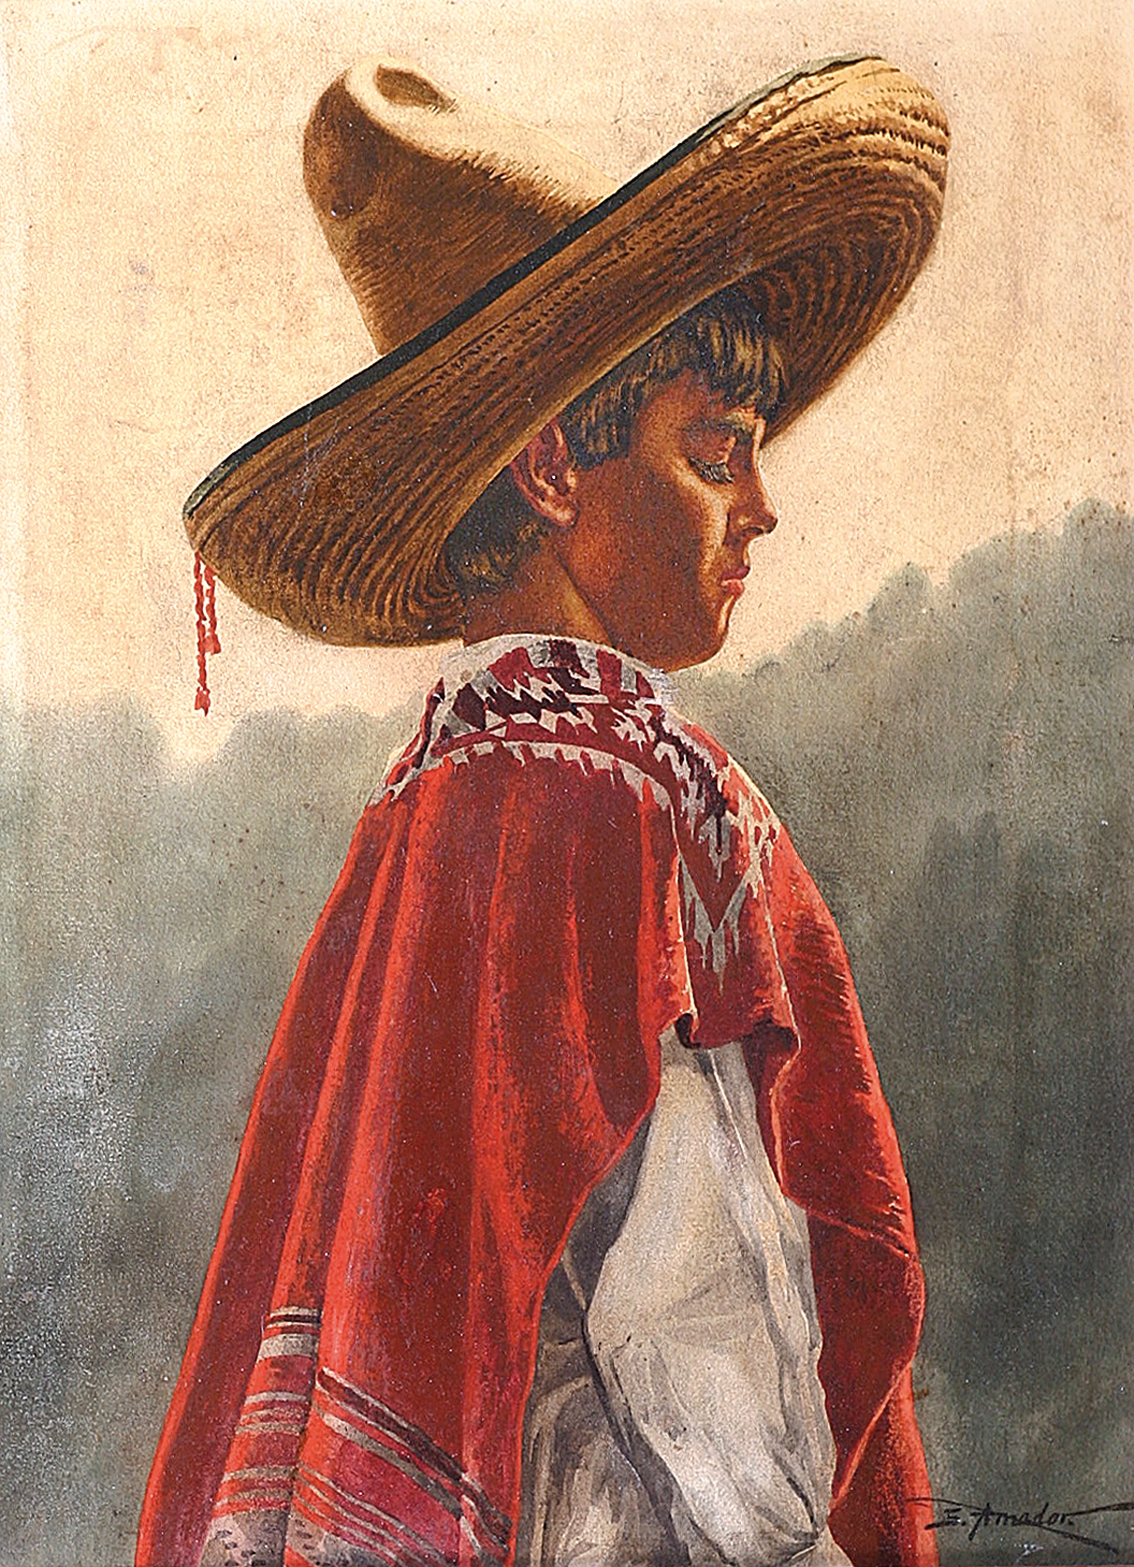 A young Mexican